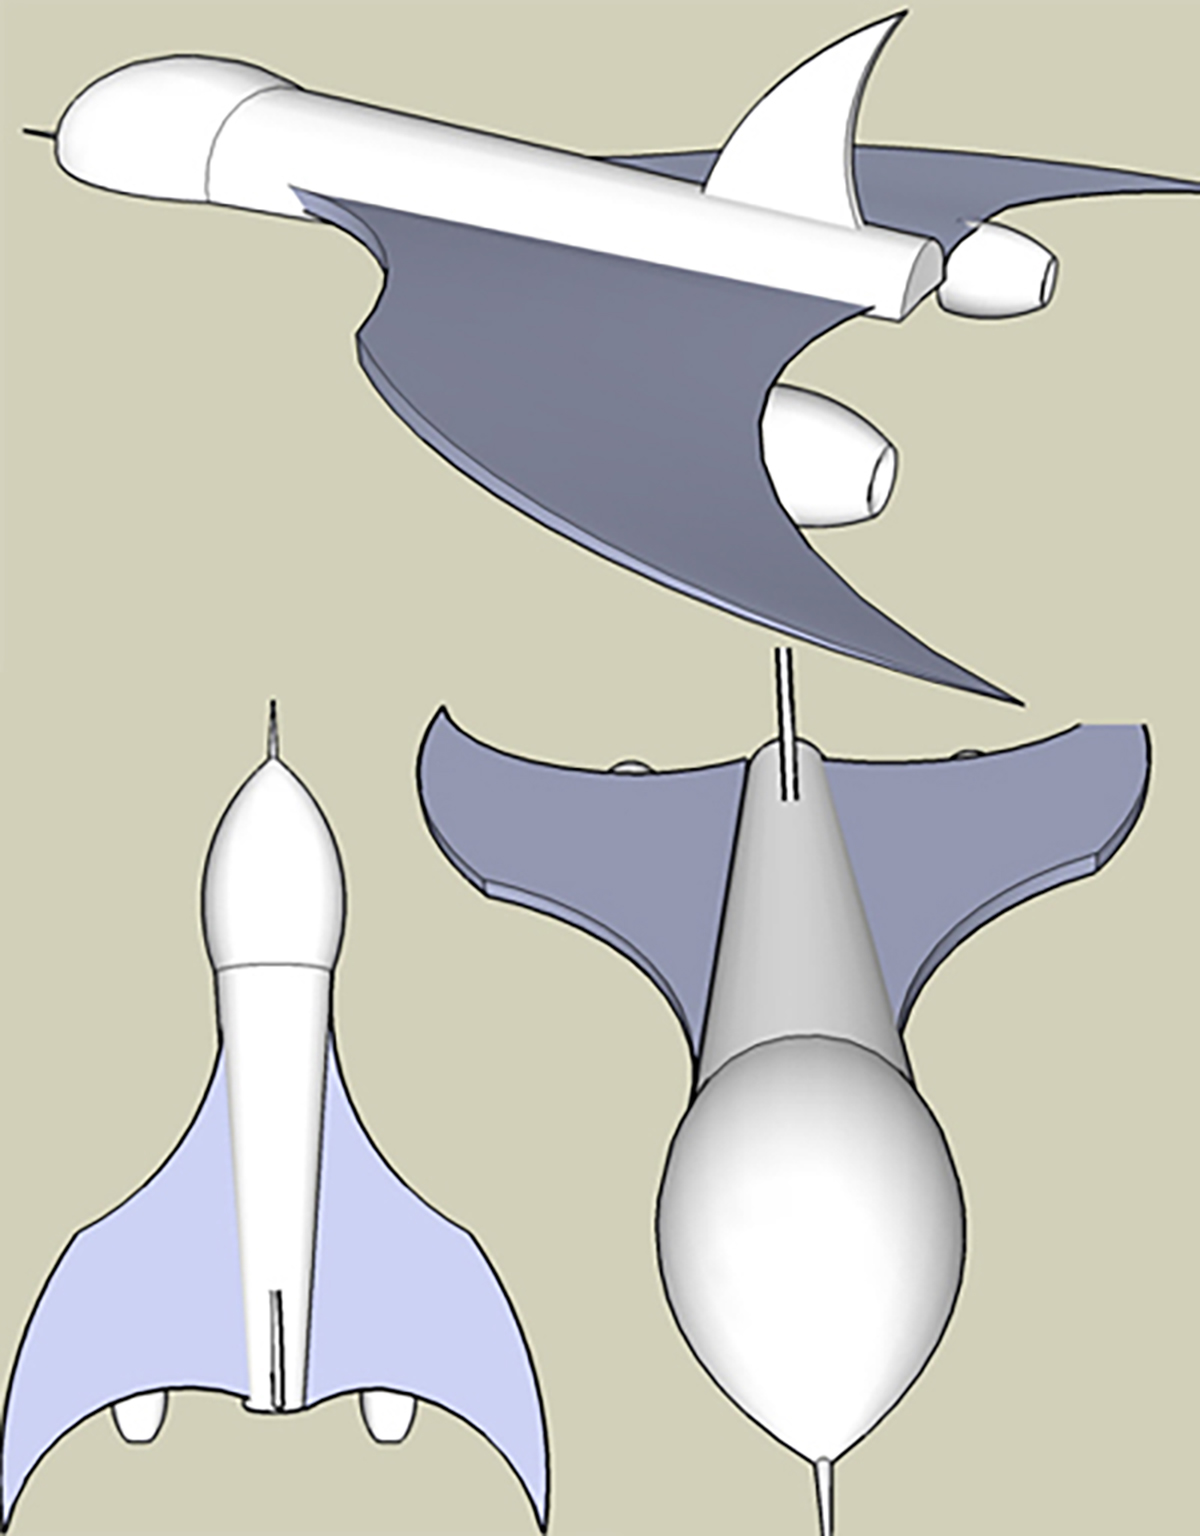 Artist computer generated concept of the SonicLiner aircraft.